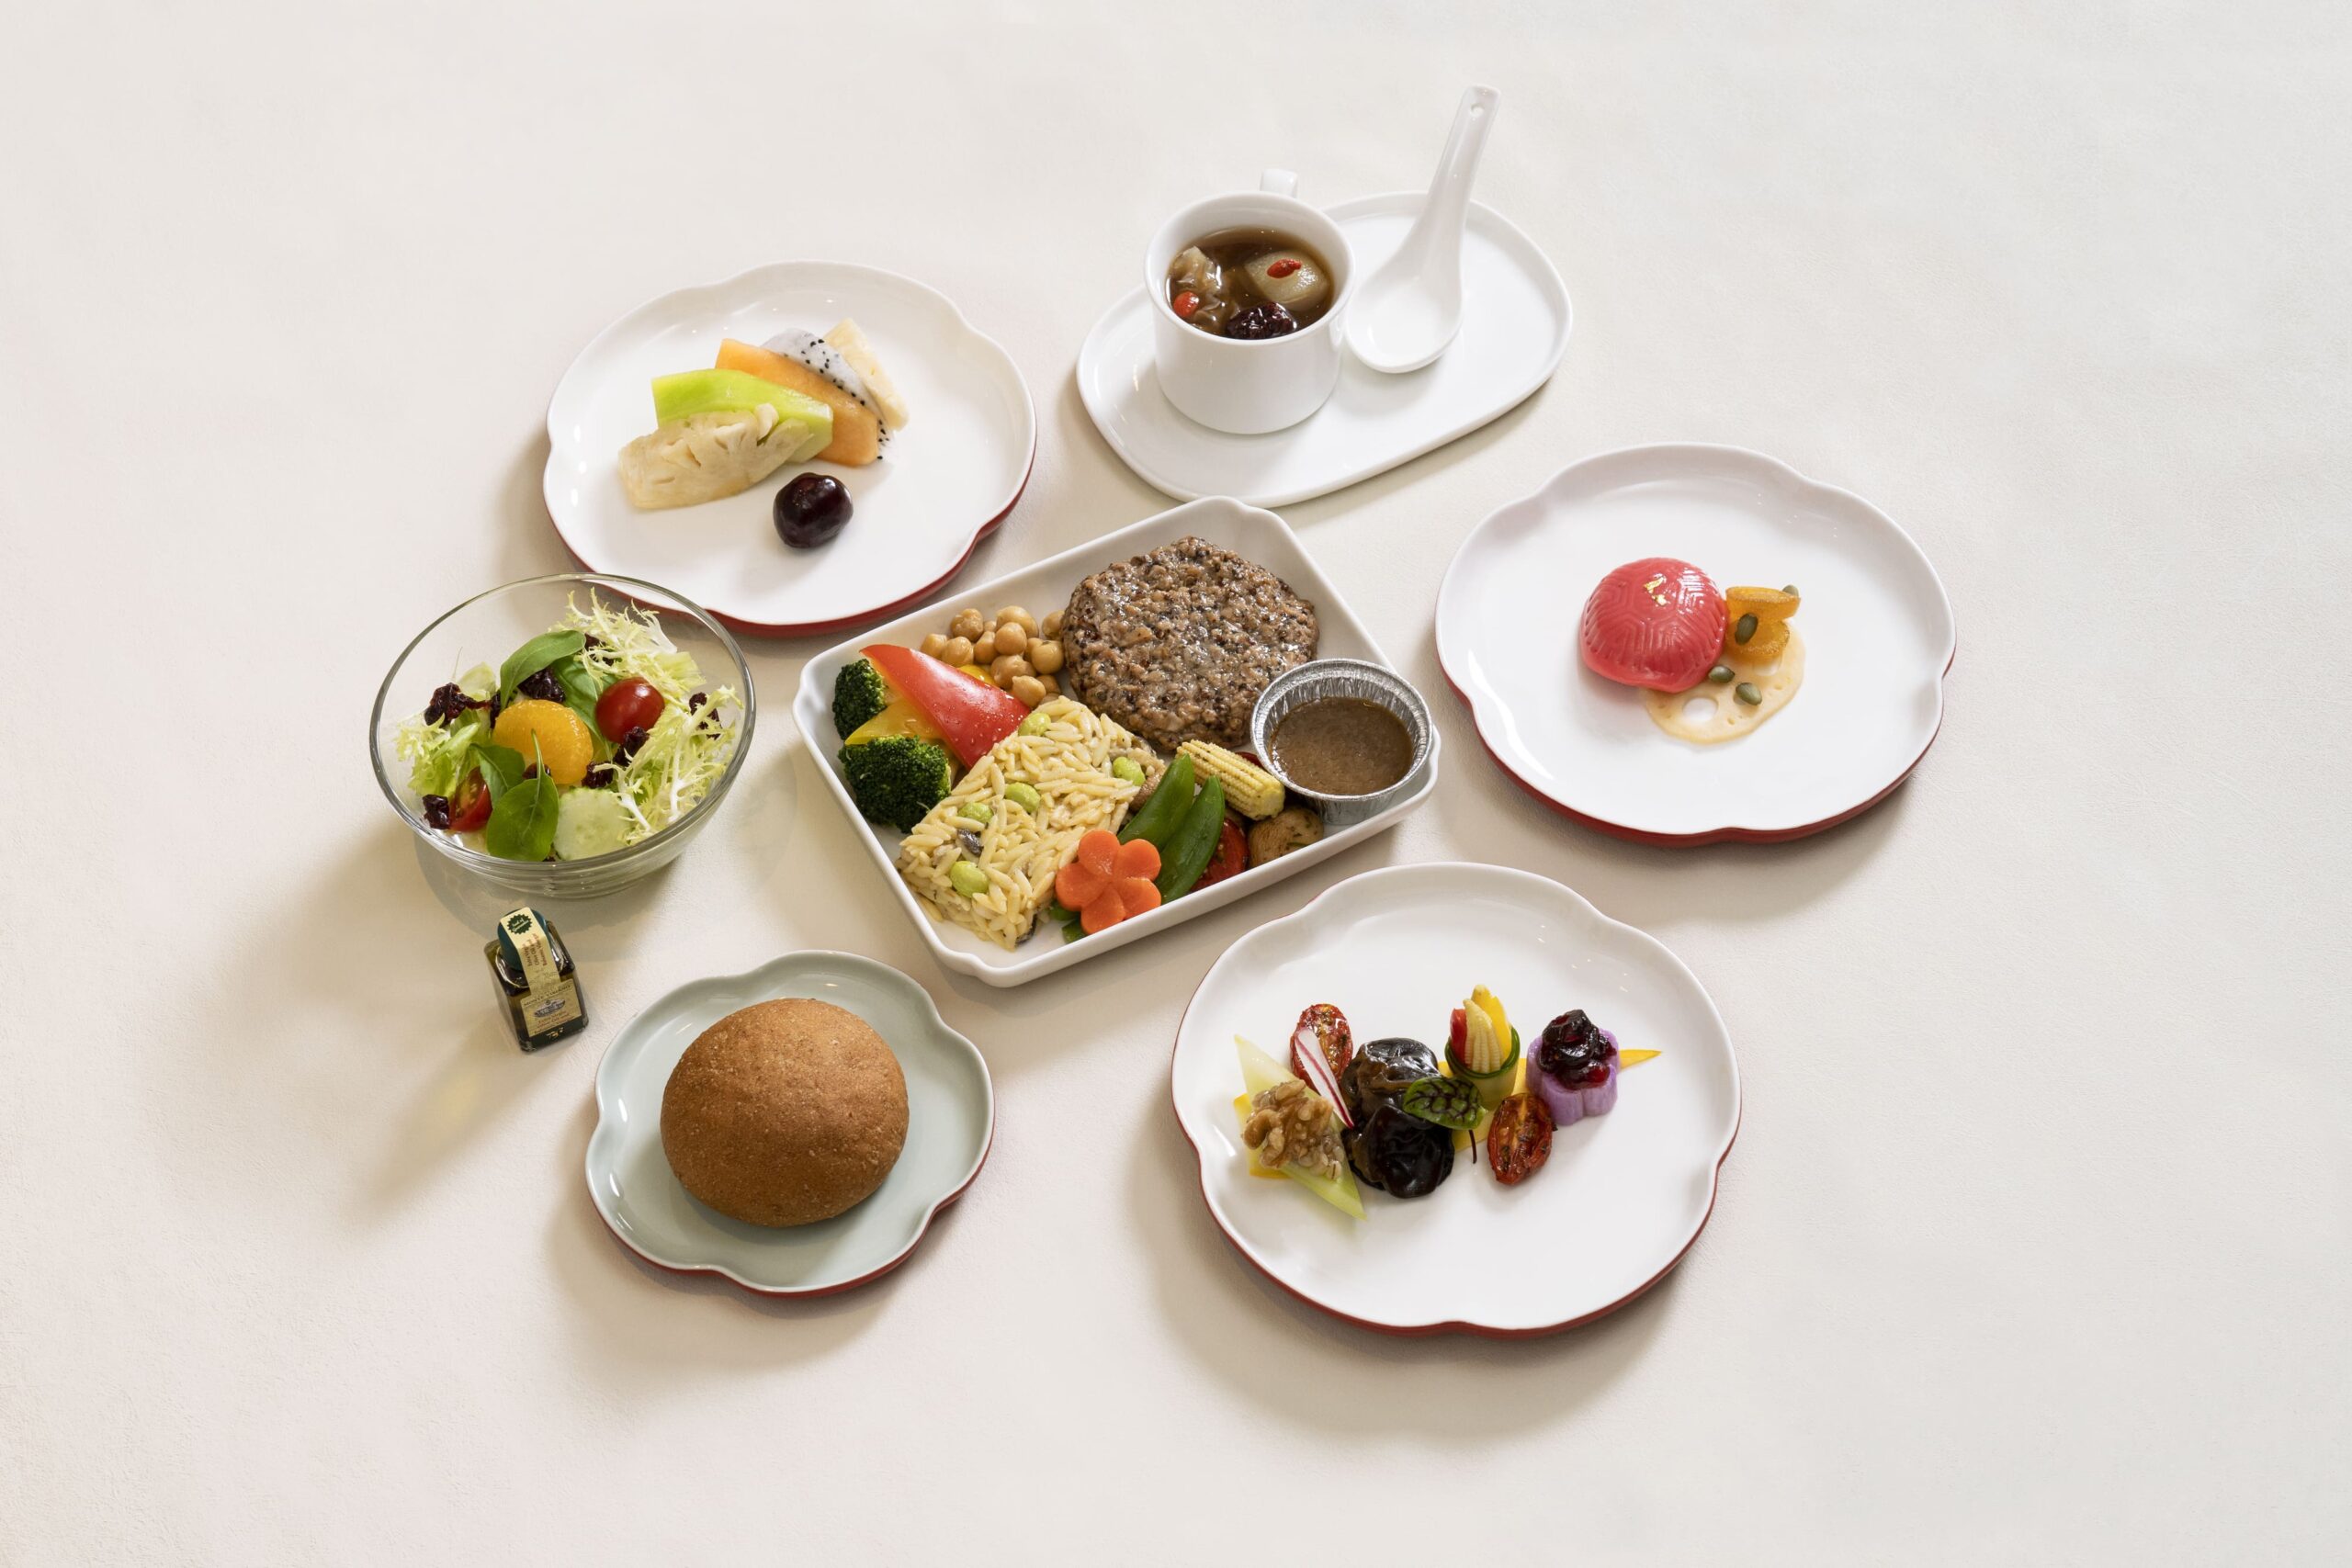 China Airlines introduces indulgent autumn seasonal menus prepared by leading restaurants from across the region.